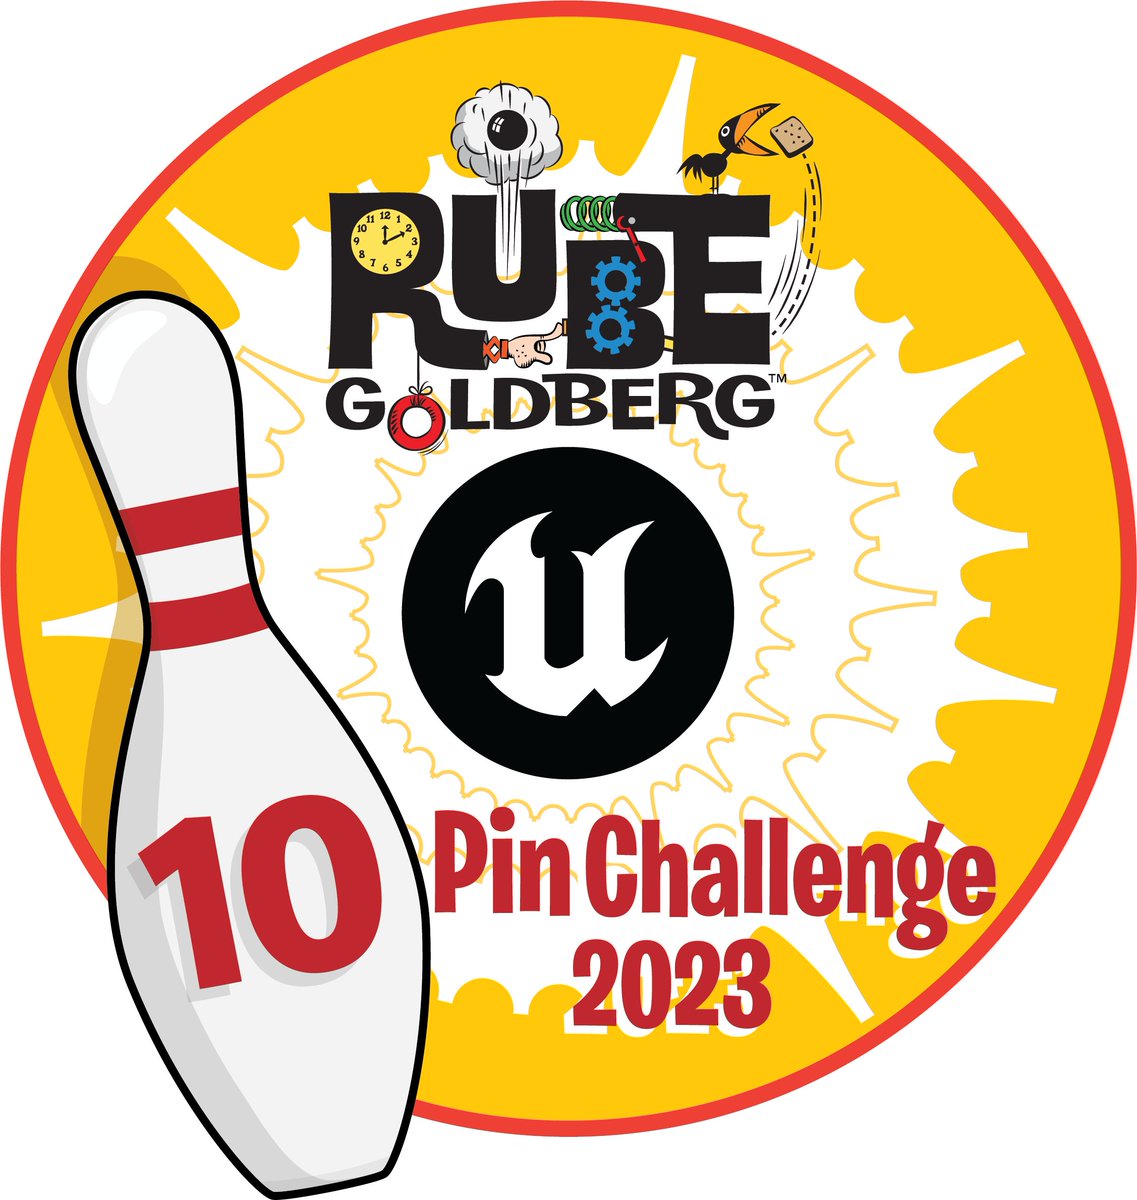 And the results are in! Check out the entries from the winners of the @unrealengine @rubegoldberg 10-Pin Challenge! rubegoldberg.org/rube-goldberg-… Congrats to everyone who participated and helped make the first #UnrealEngine #RubeGoldberg competition such a success!